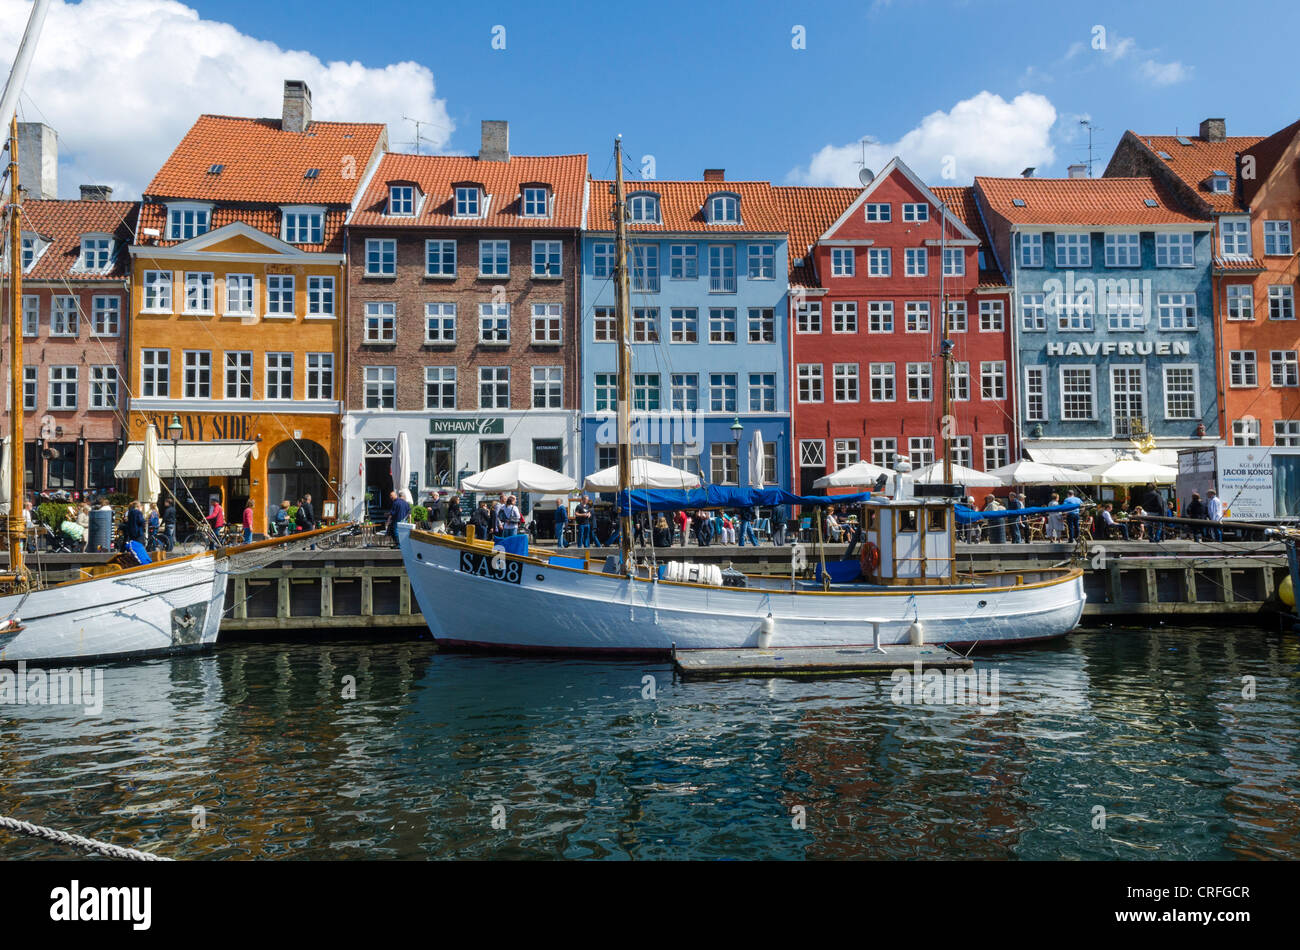 At Nyhavn waterfront with boats, Copenhagen, Denmark, Europe Stock Photo